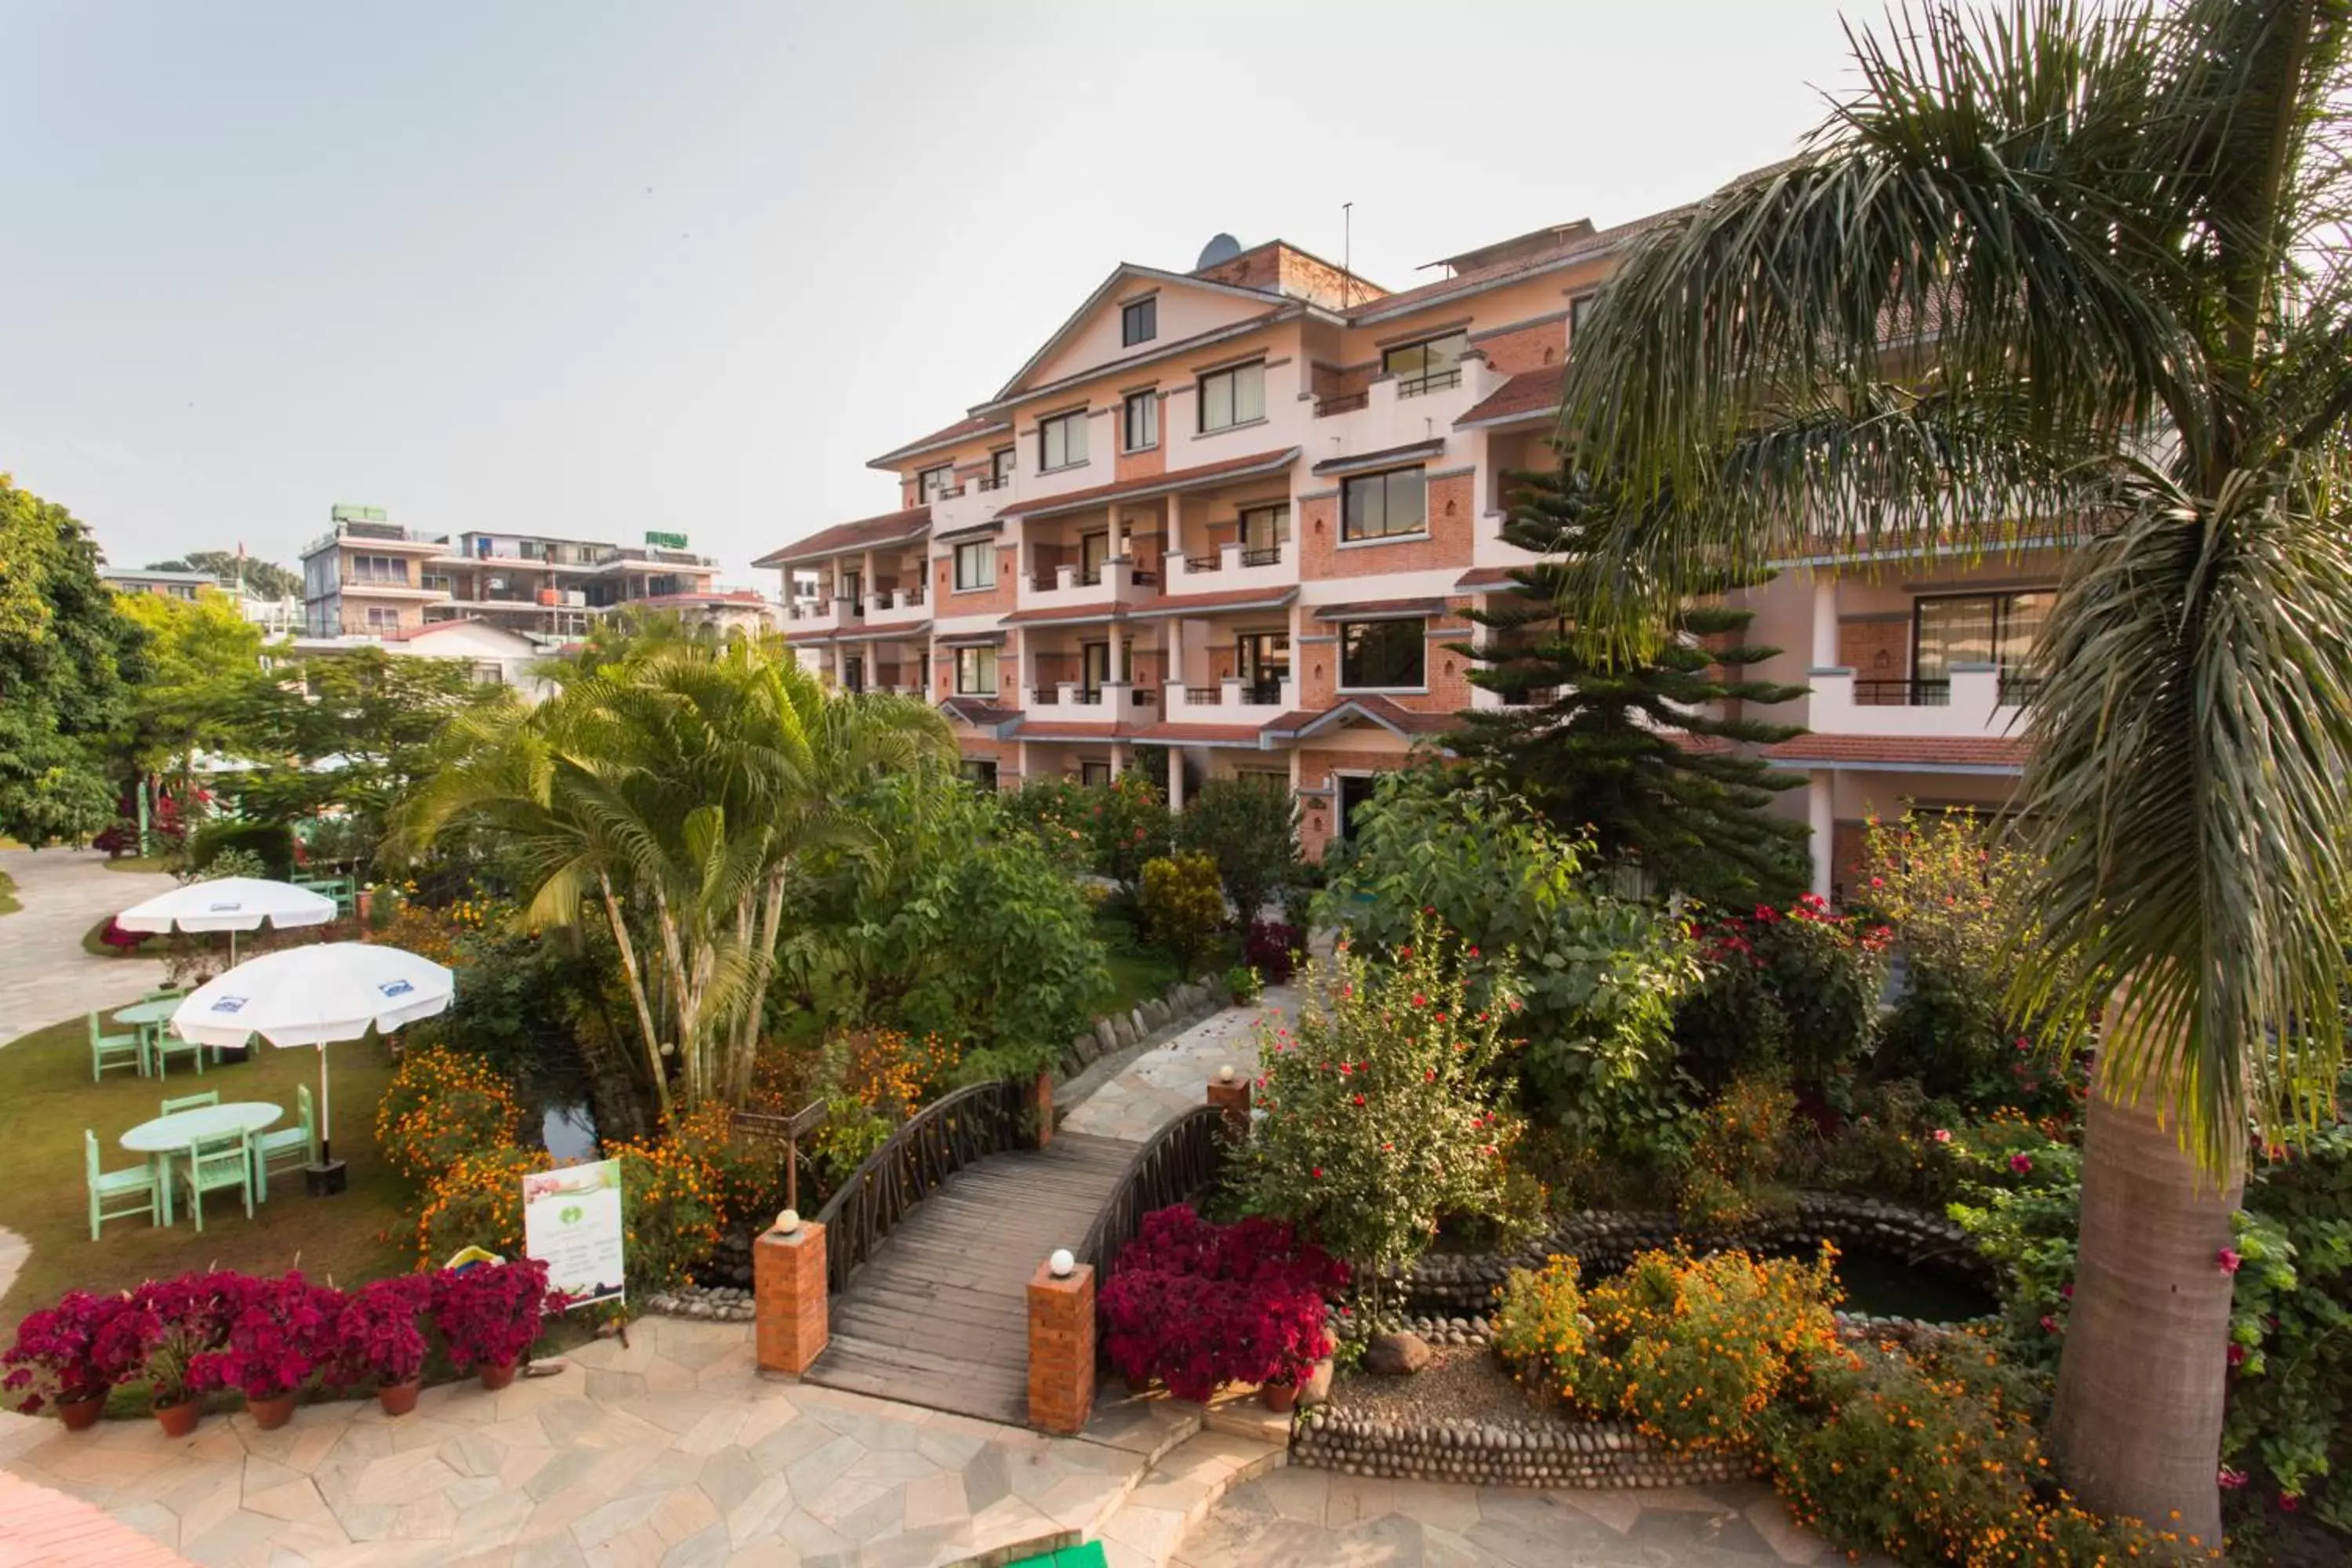 Property building in Mount Kailash Resort